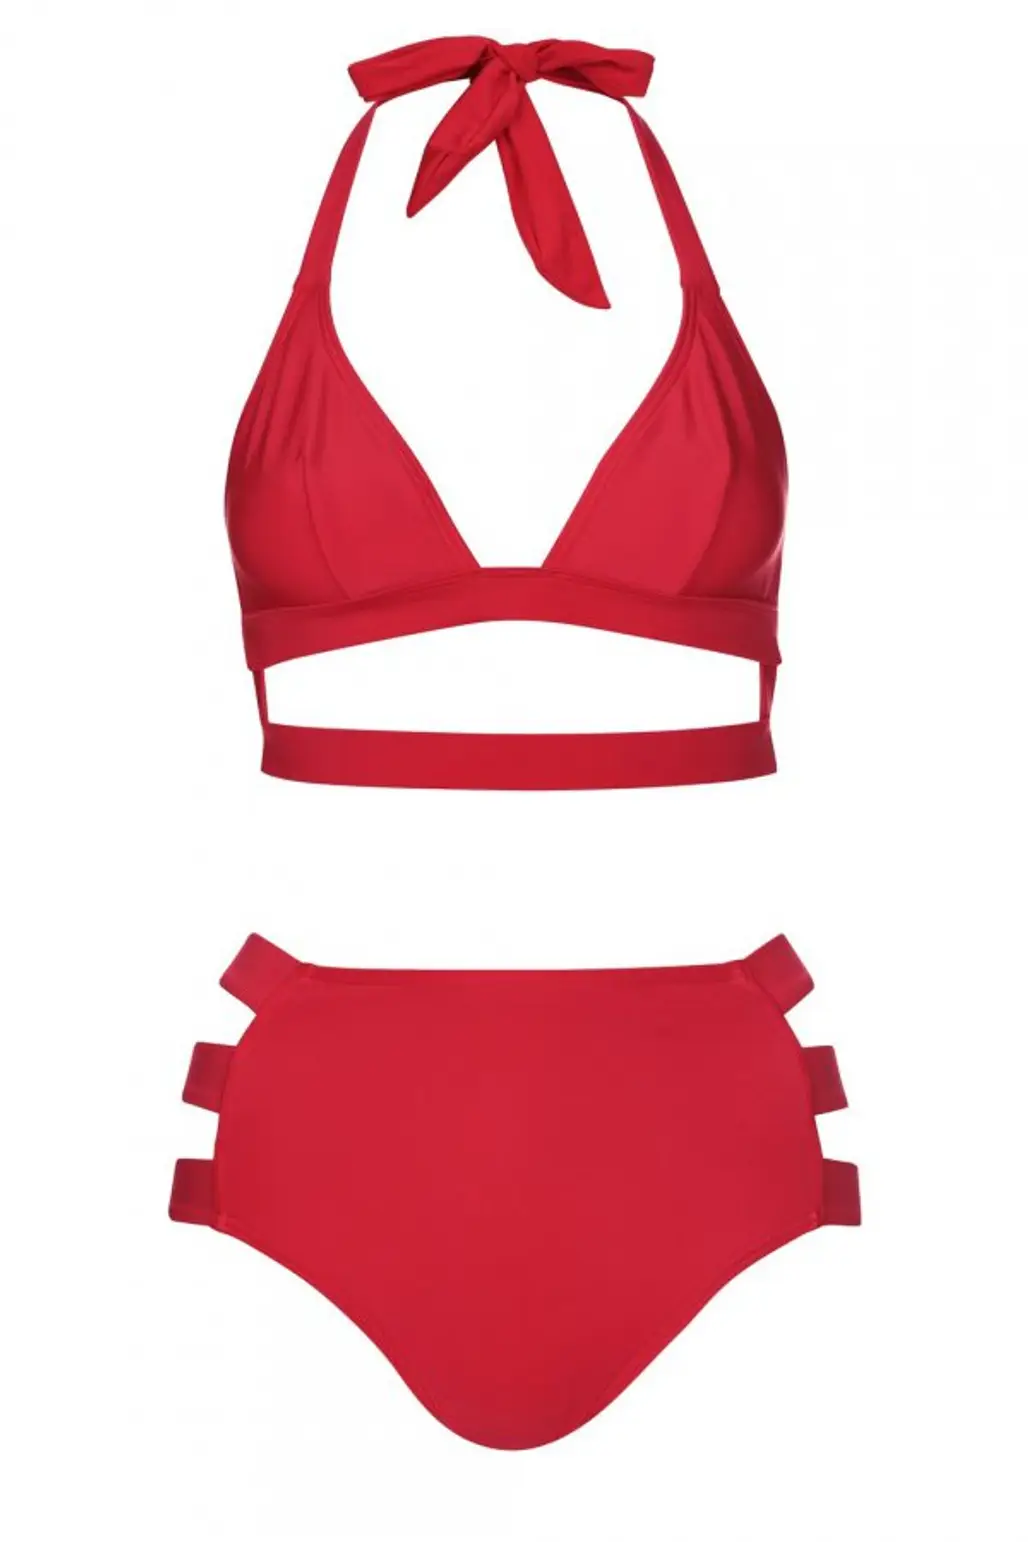 clothing, red, swimwear, one piece swimsuit, maillot,